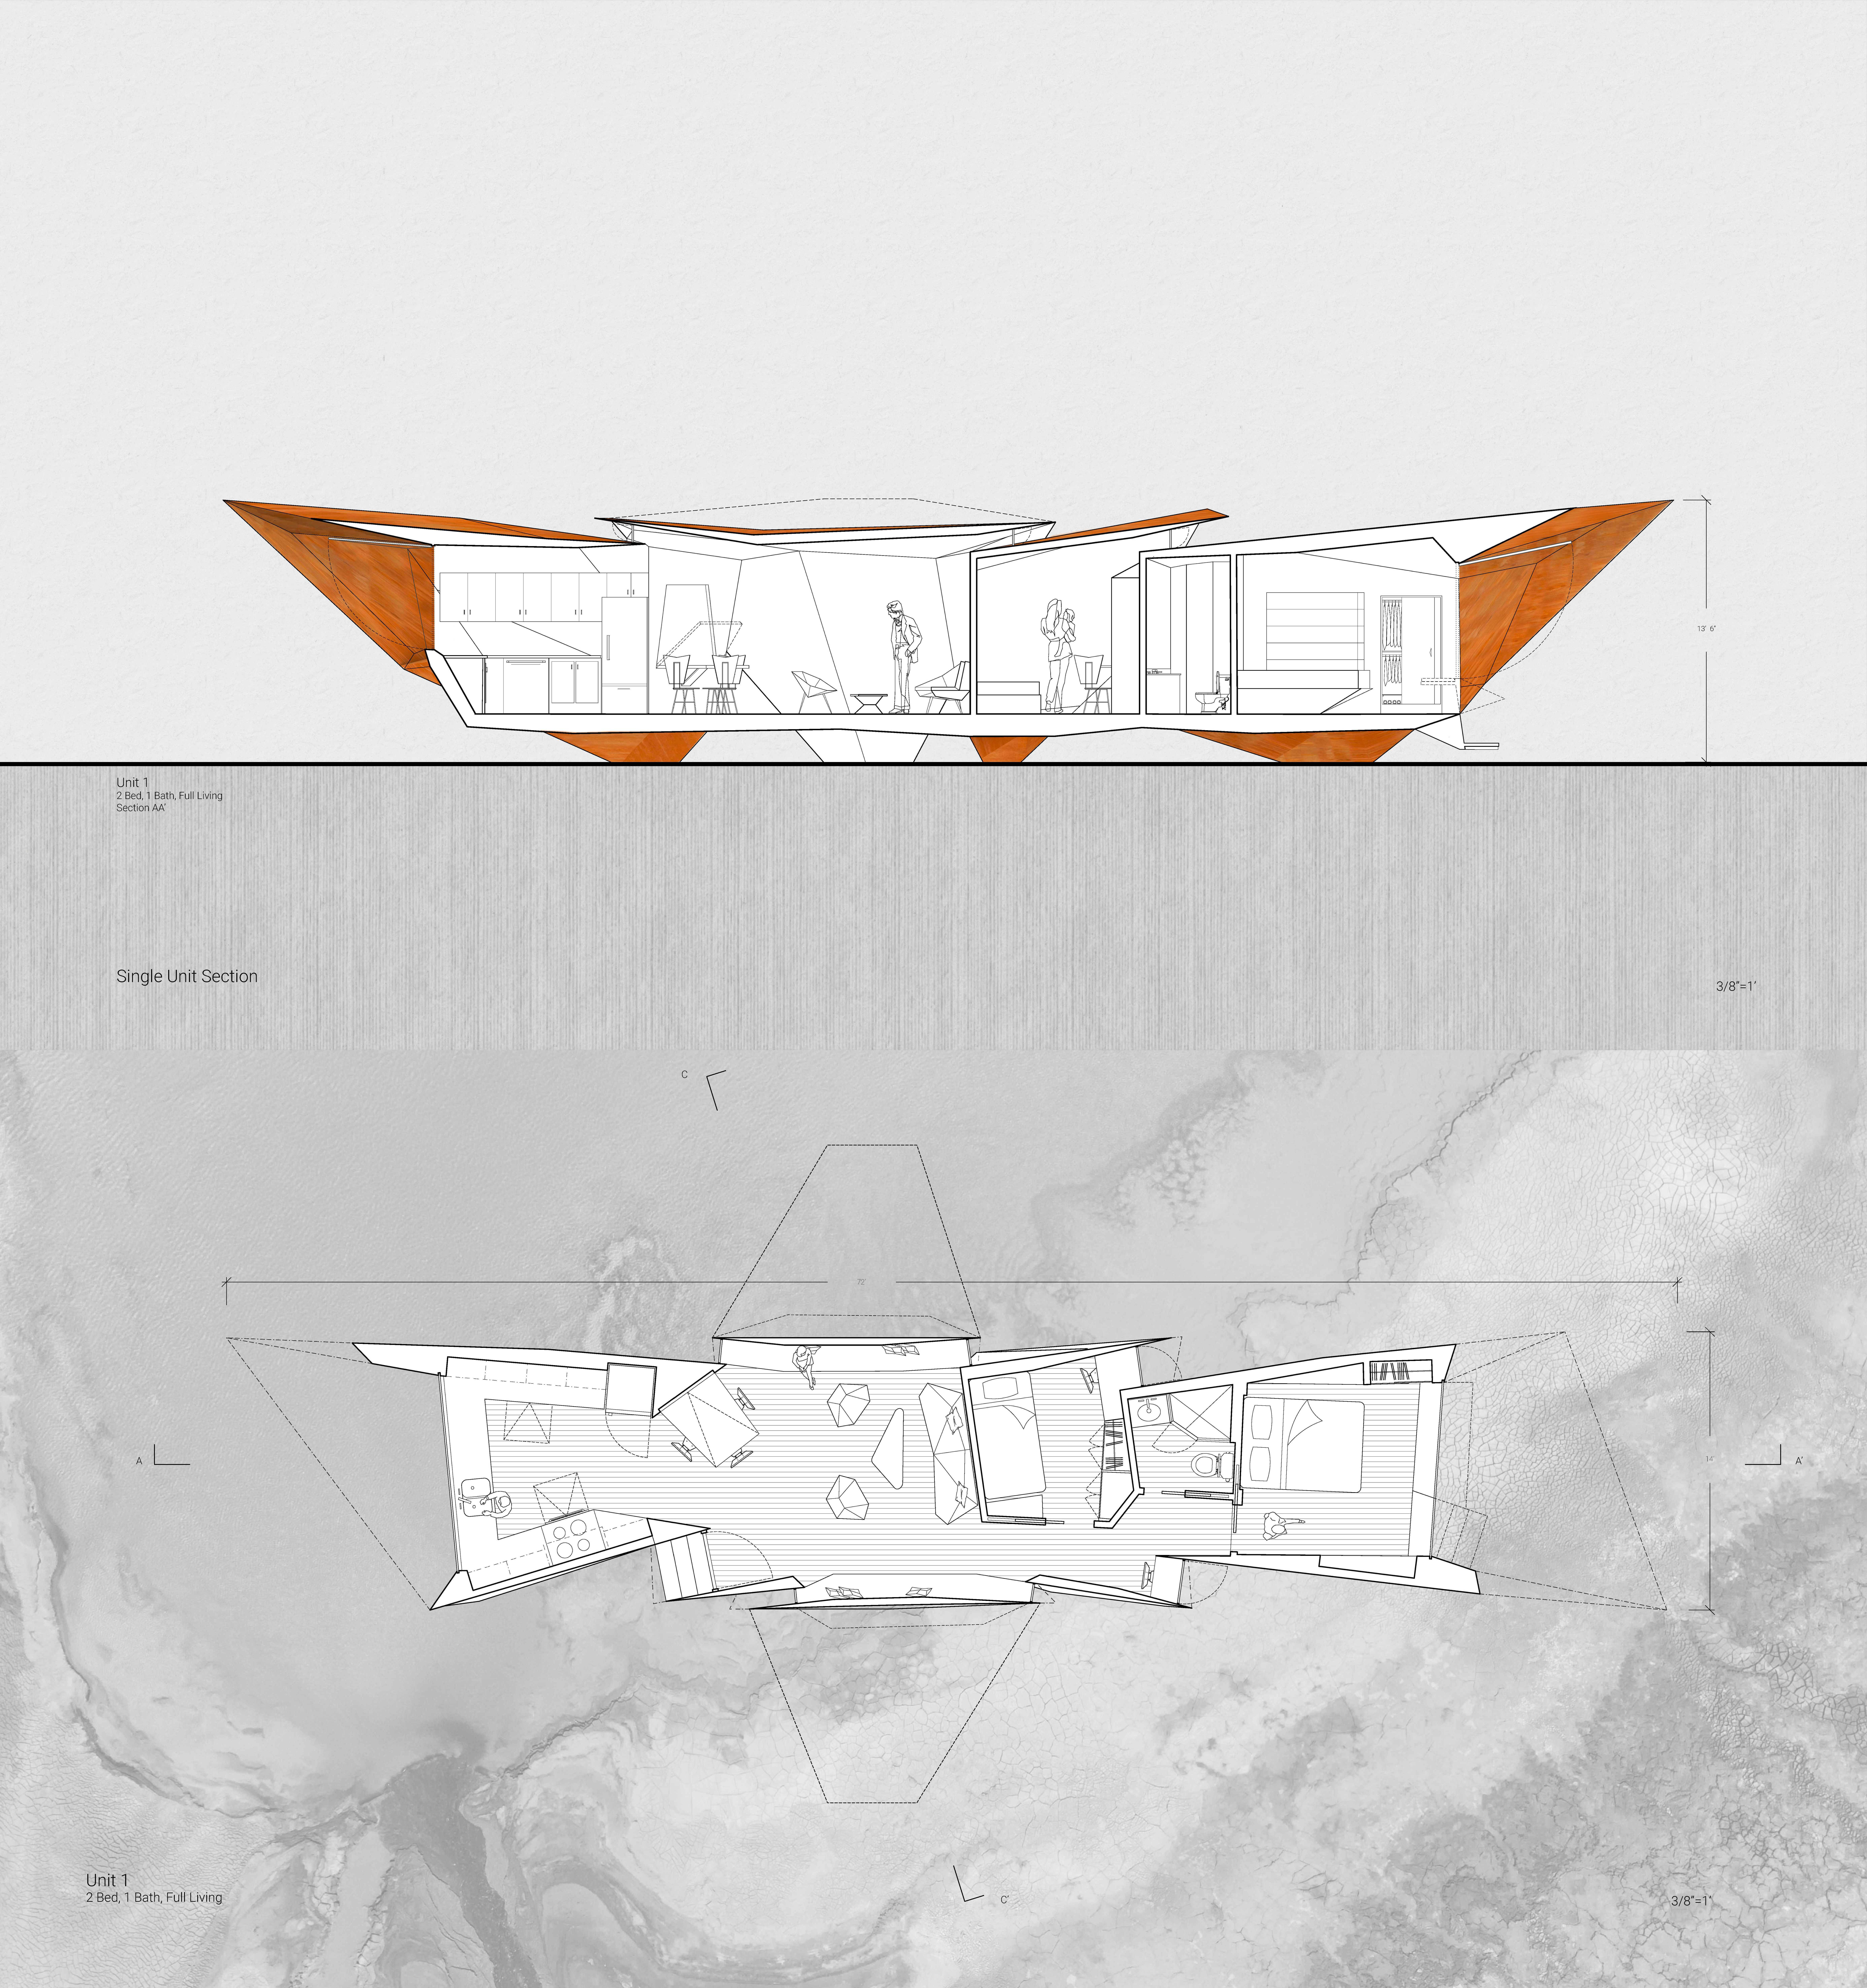 Site plan for mobile home and cross-section image of structure.